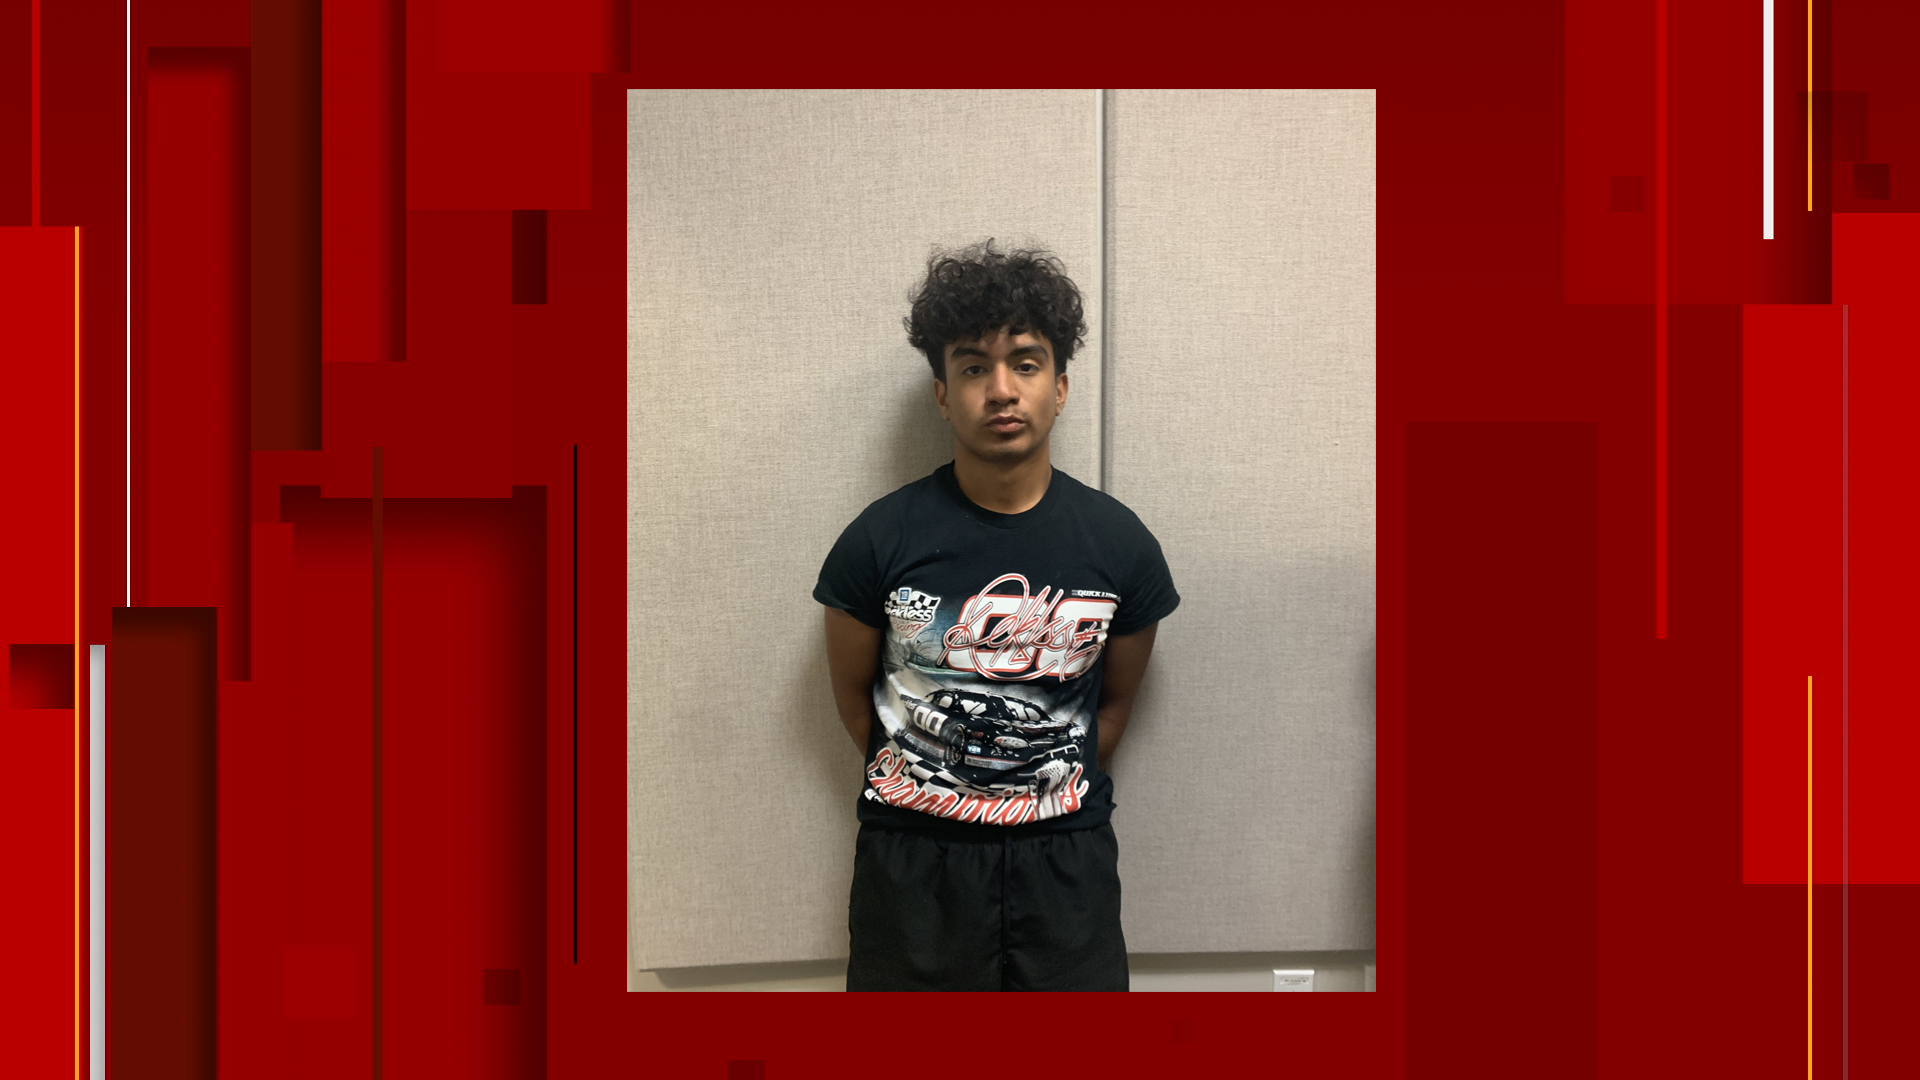 Xxx Hd16 - Man, 18, arrested for child pornography, sex assault of a 14-year-old girl,  BCSO says